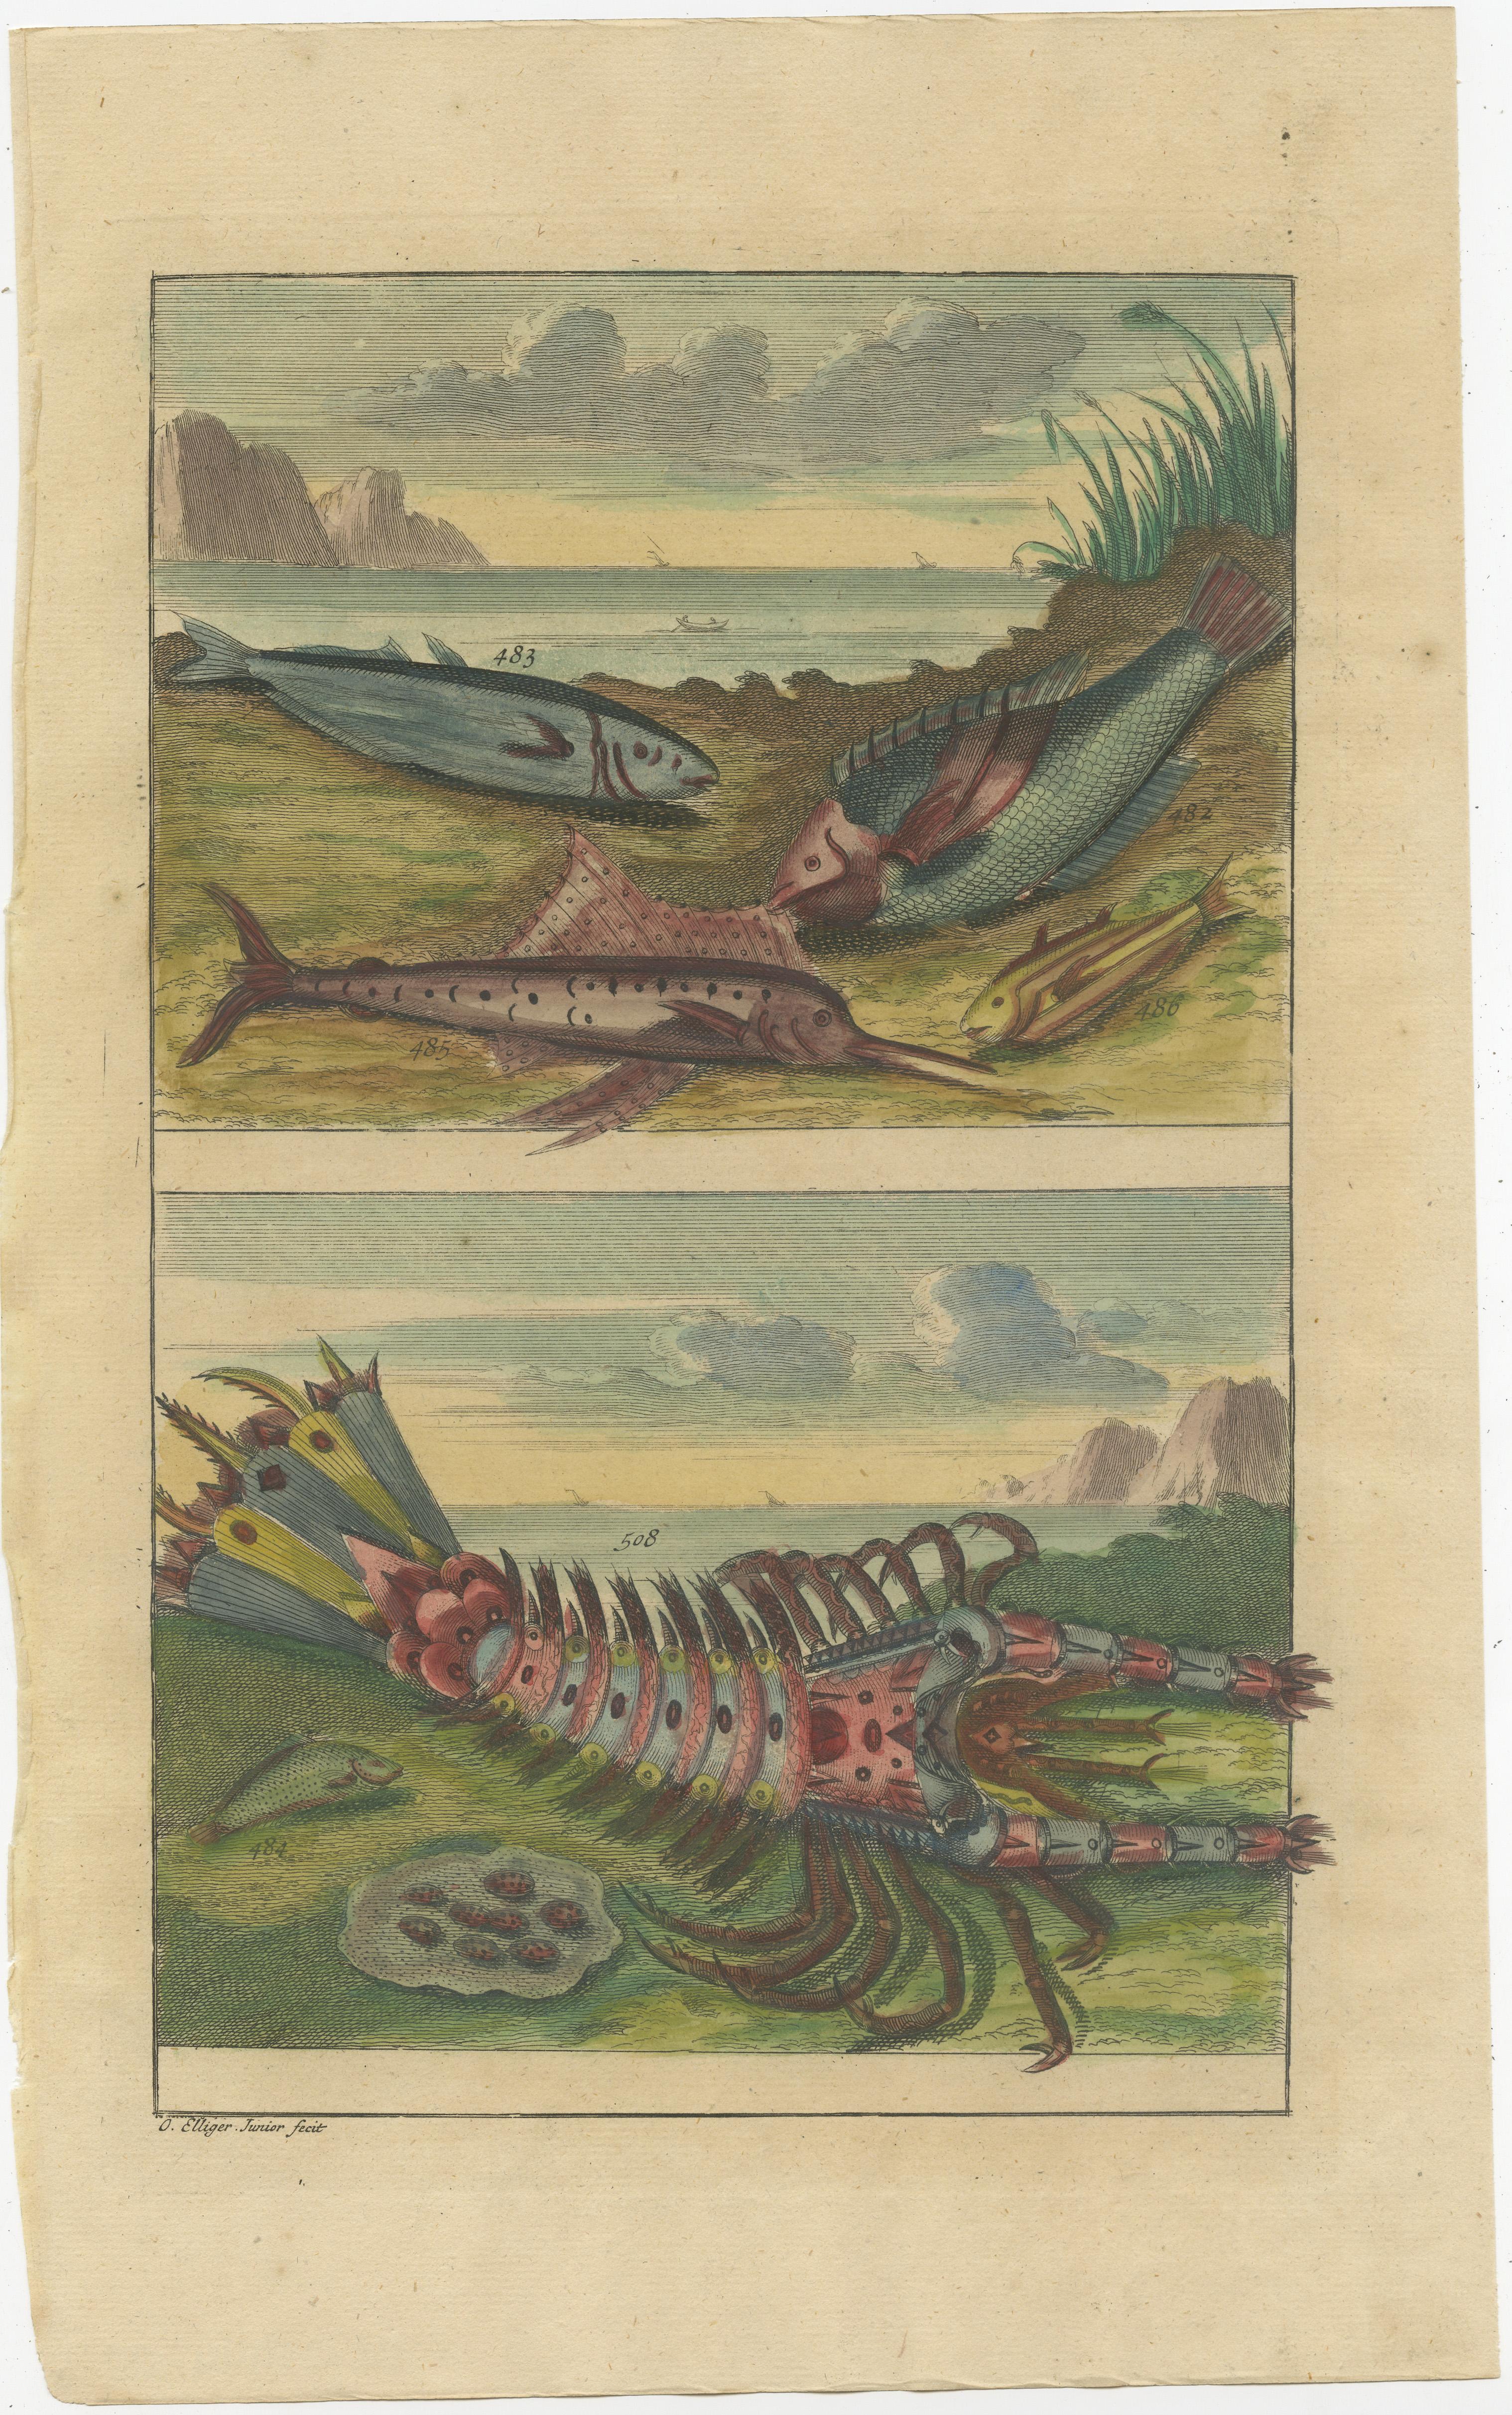 Set of three antique prints of various fishes and crustaceans. These print originate from 'Oud en Nieuw Oost-Indiën' by F. Valentijn.

François Valentyn or Valentijn (17 April 1666 – 6 August 1727) was a Dutch Calvinist minister, naturalist and